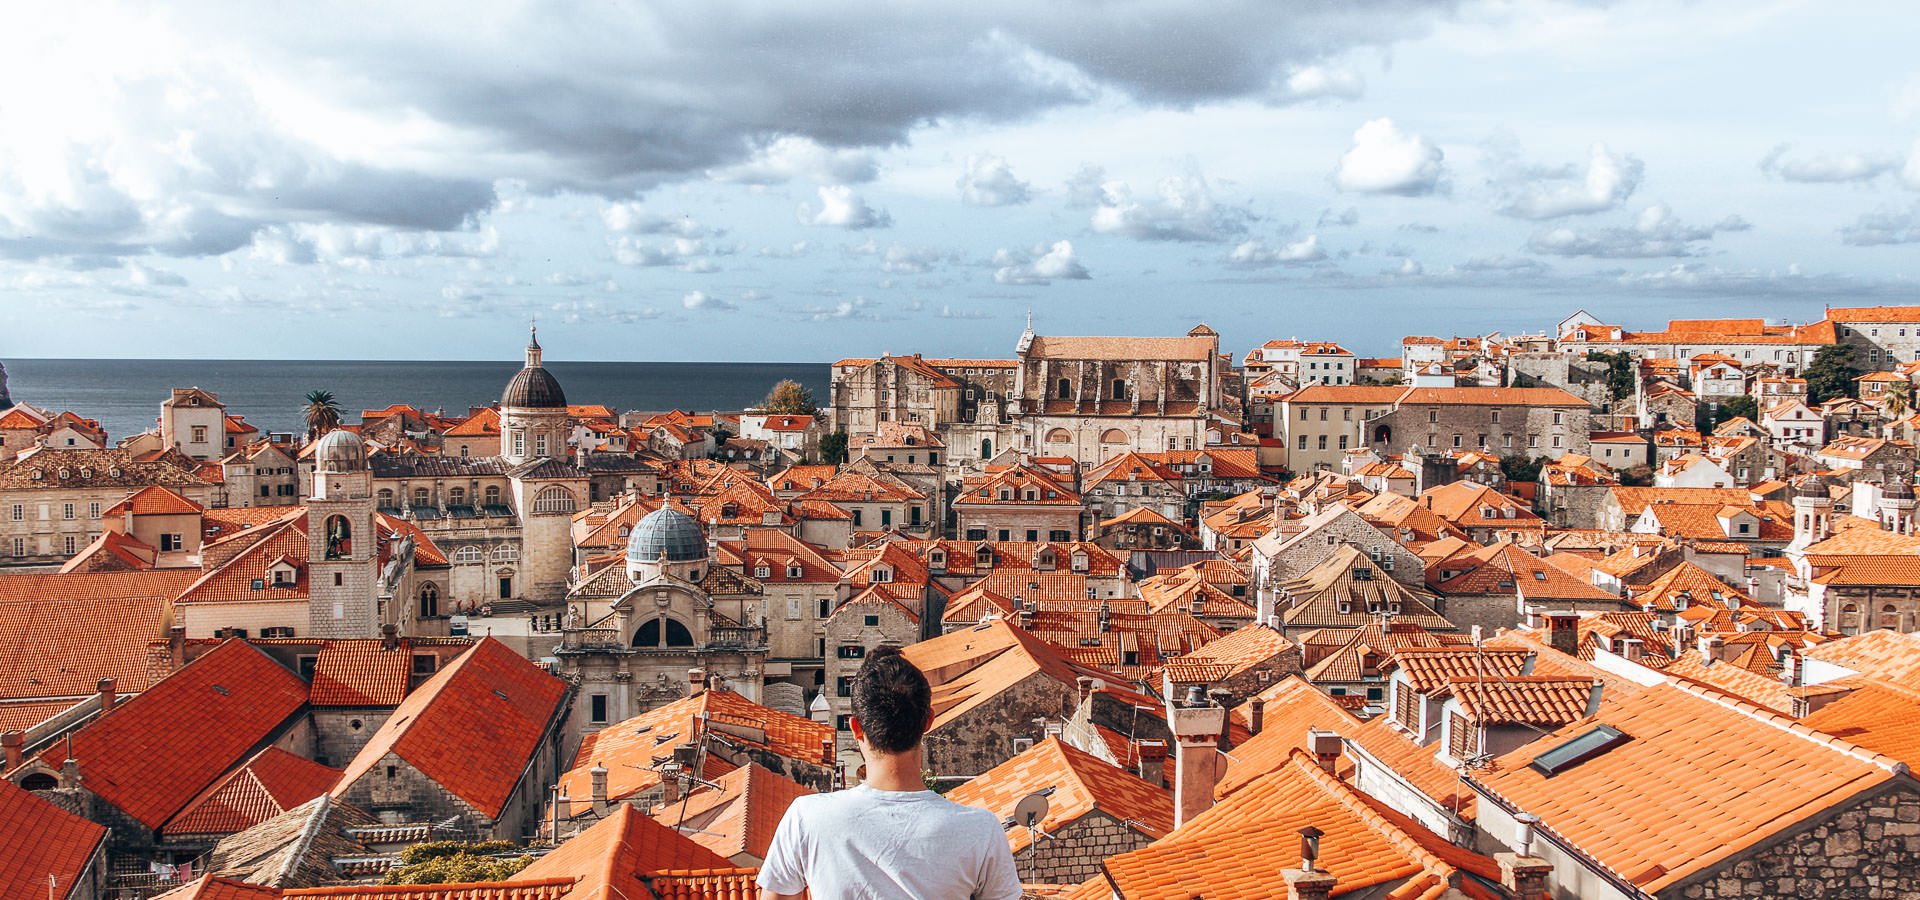 How To Spend 48 Hours In Dubrovnik | photos of Croatia 2